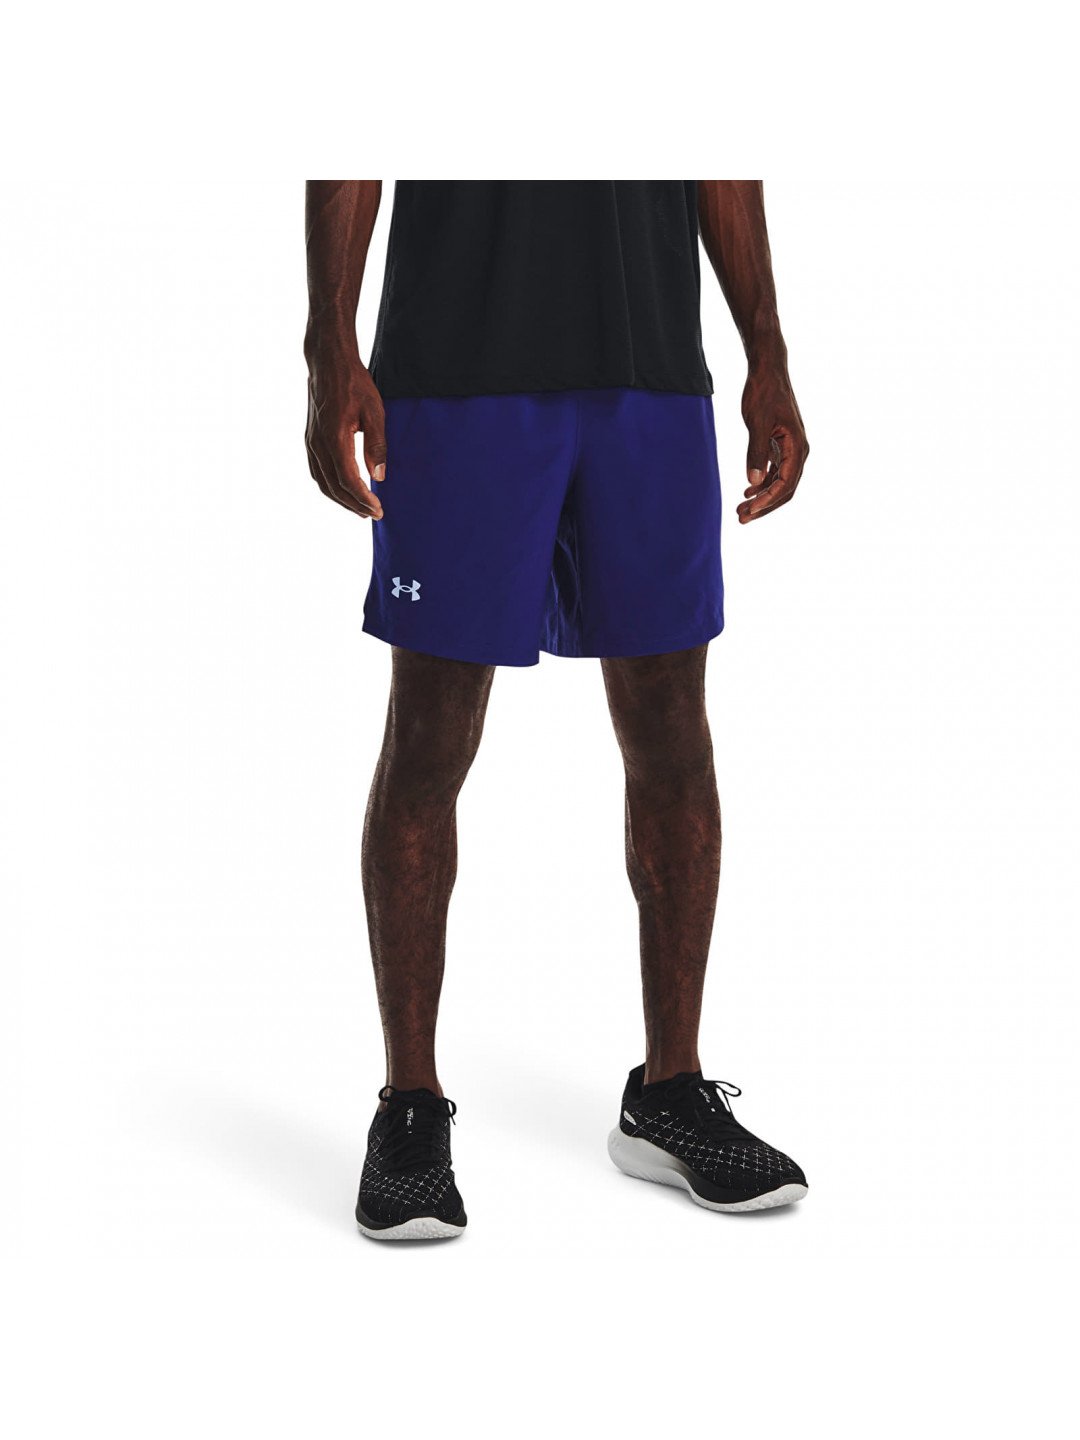 Under Armour Launch 7 2-In-1 Short Blue